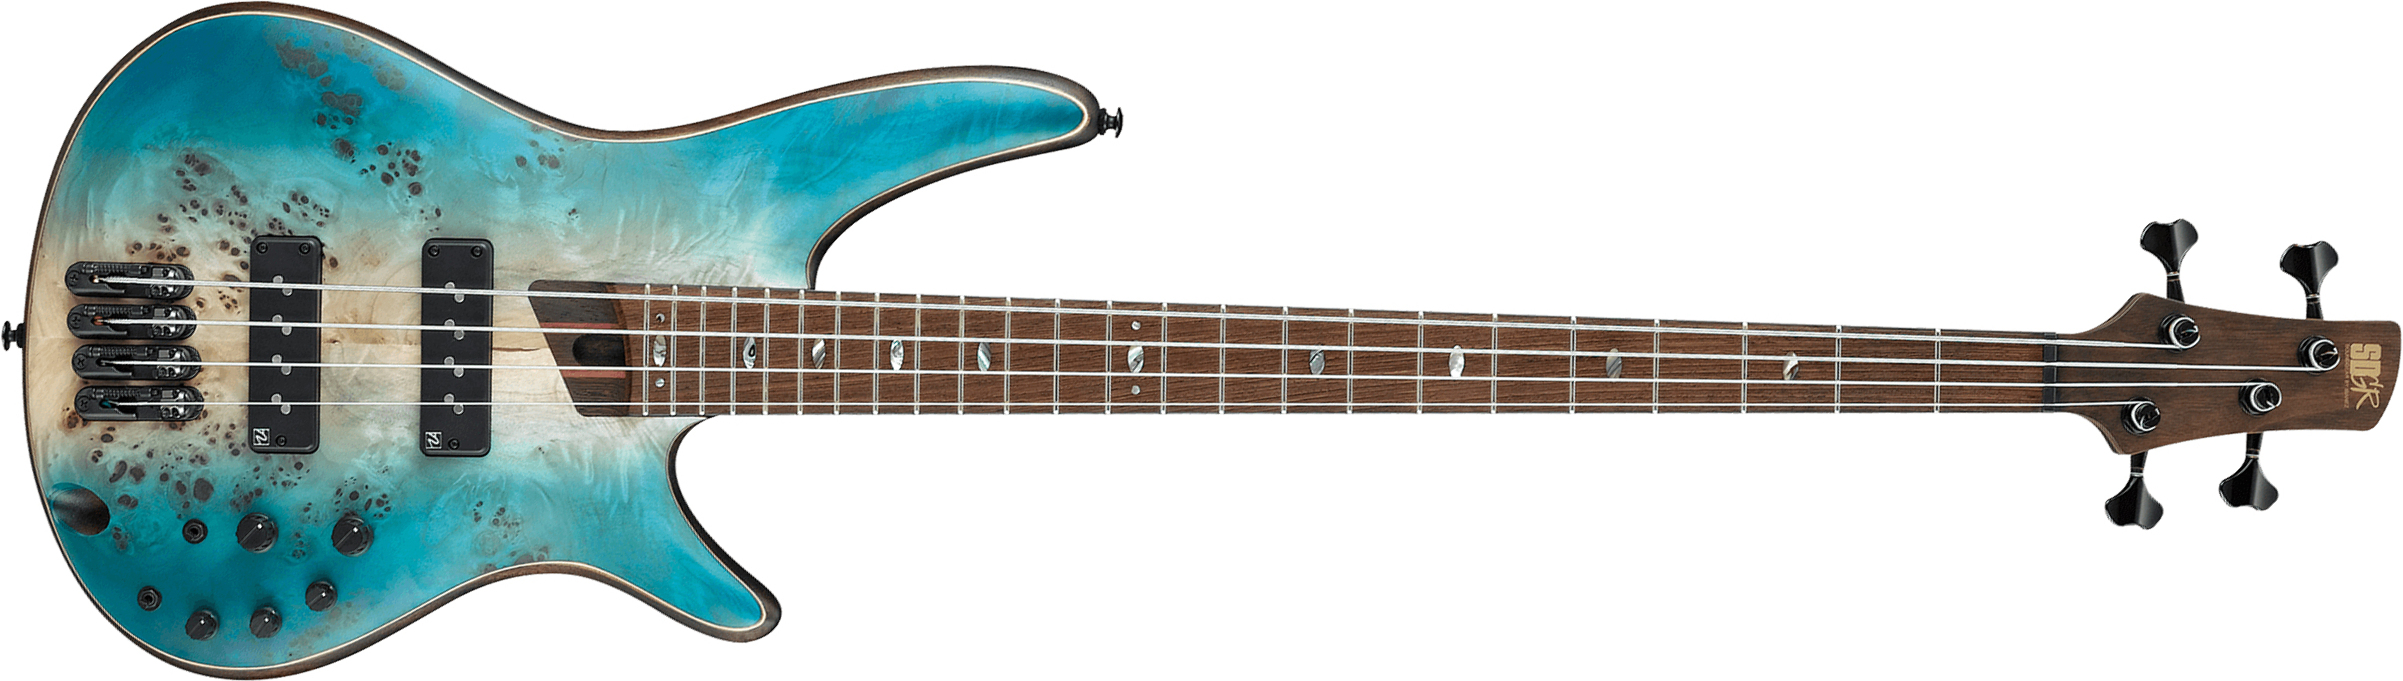 Ibanez Sr1600b Chf Premium Active Pp - Caribbean Shoreline Flat - Solid body electric bass - Main picture